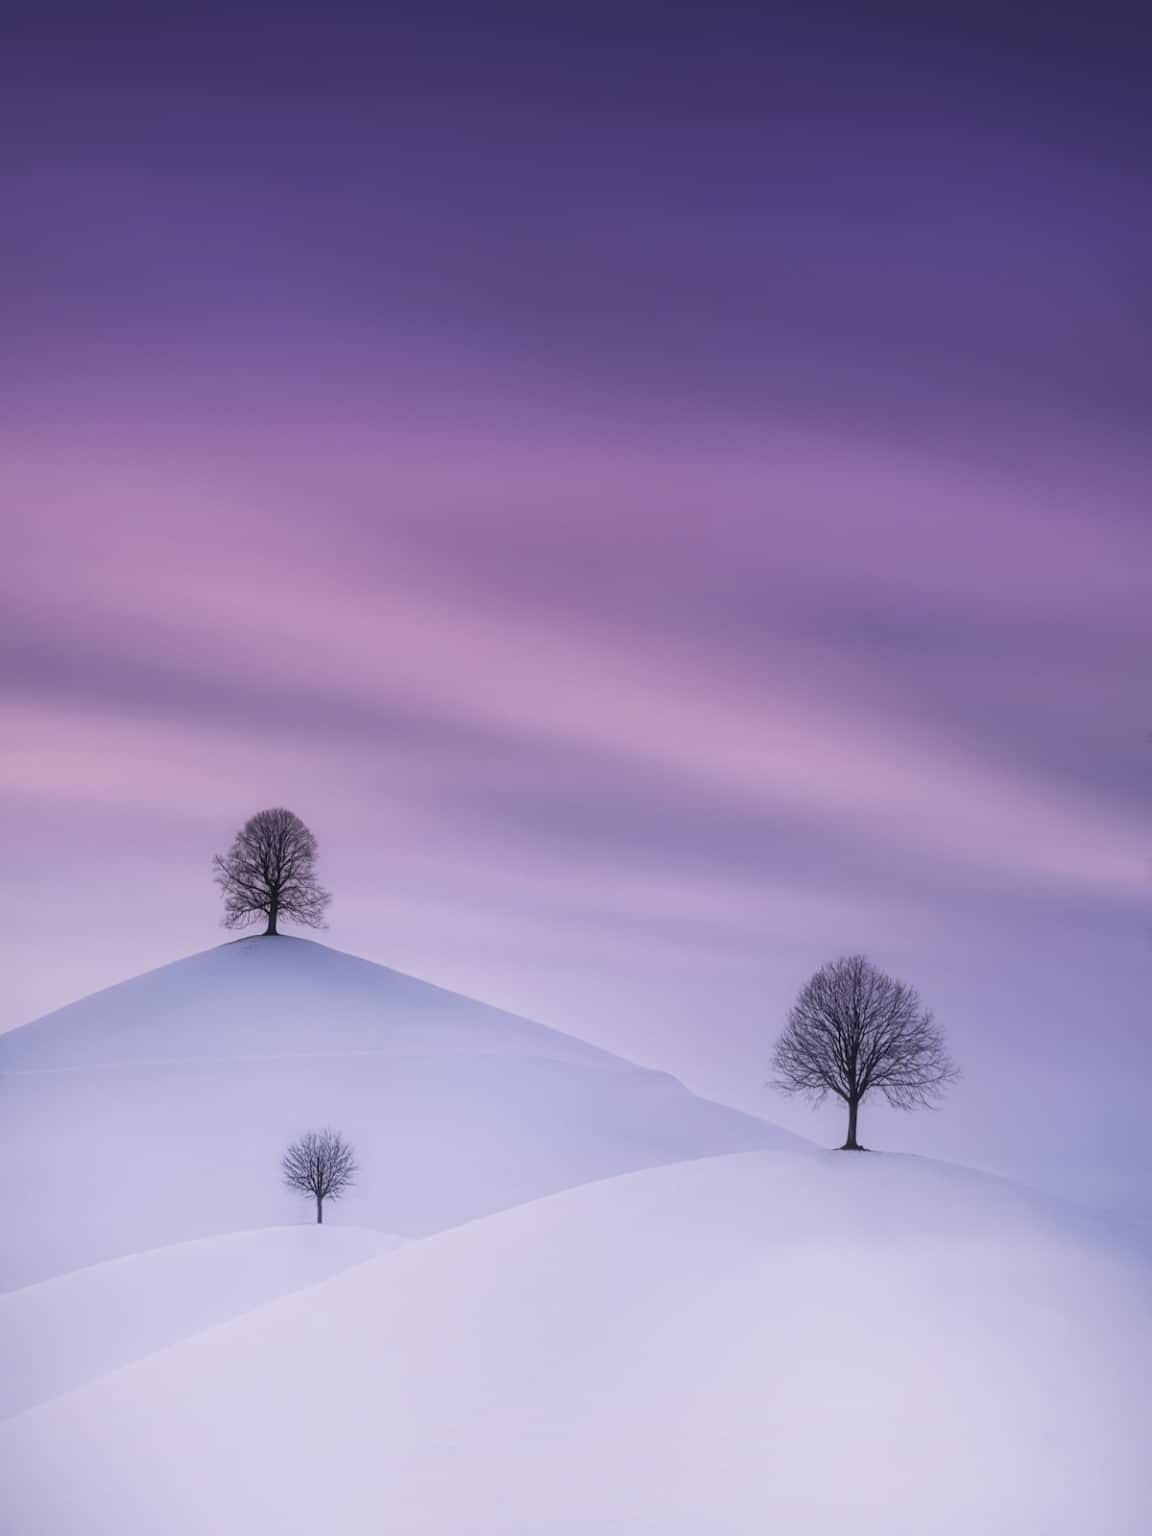 Landscape Photographer of the Year 2021 competition